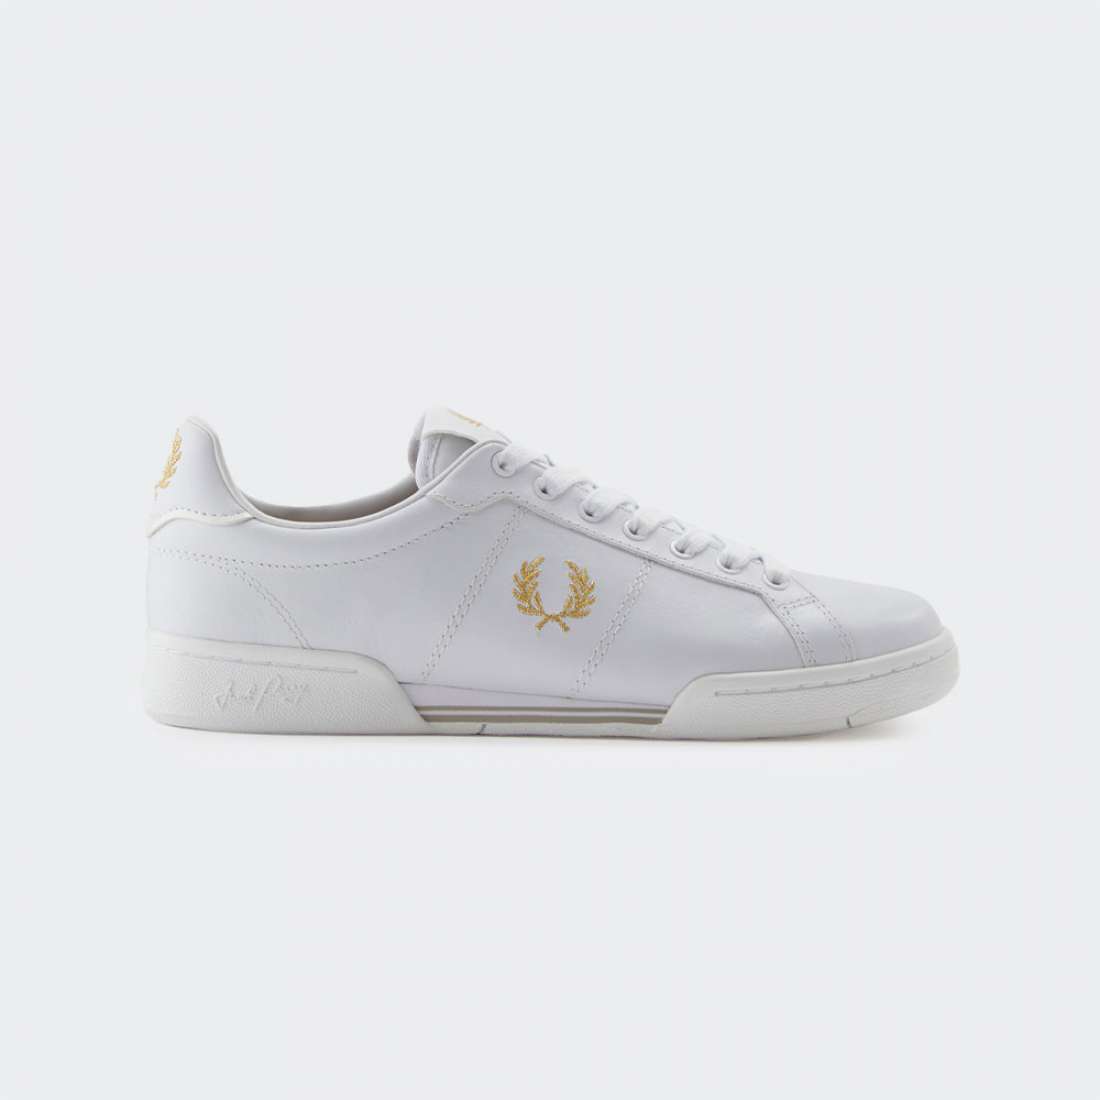 FRED PERRY B722 WHITE/GOLD